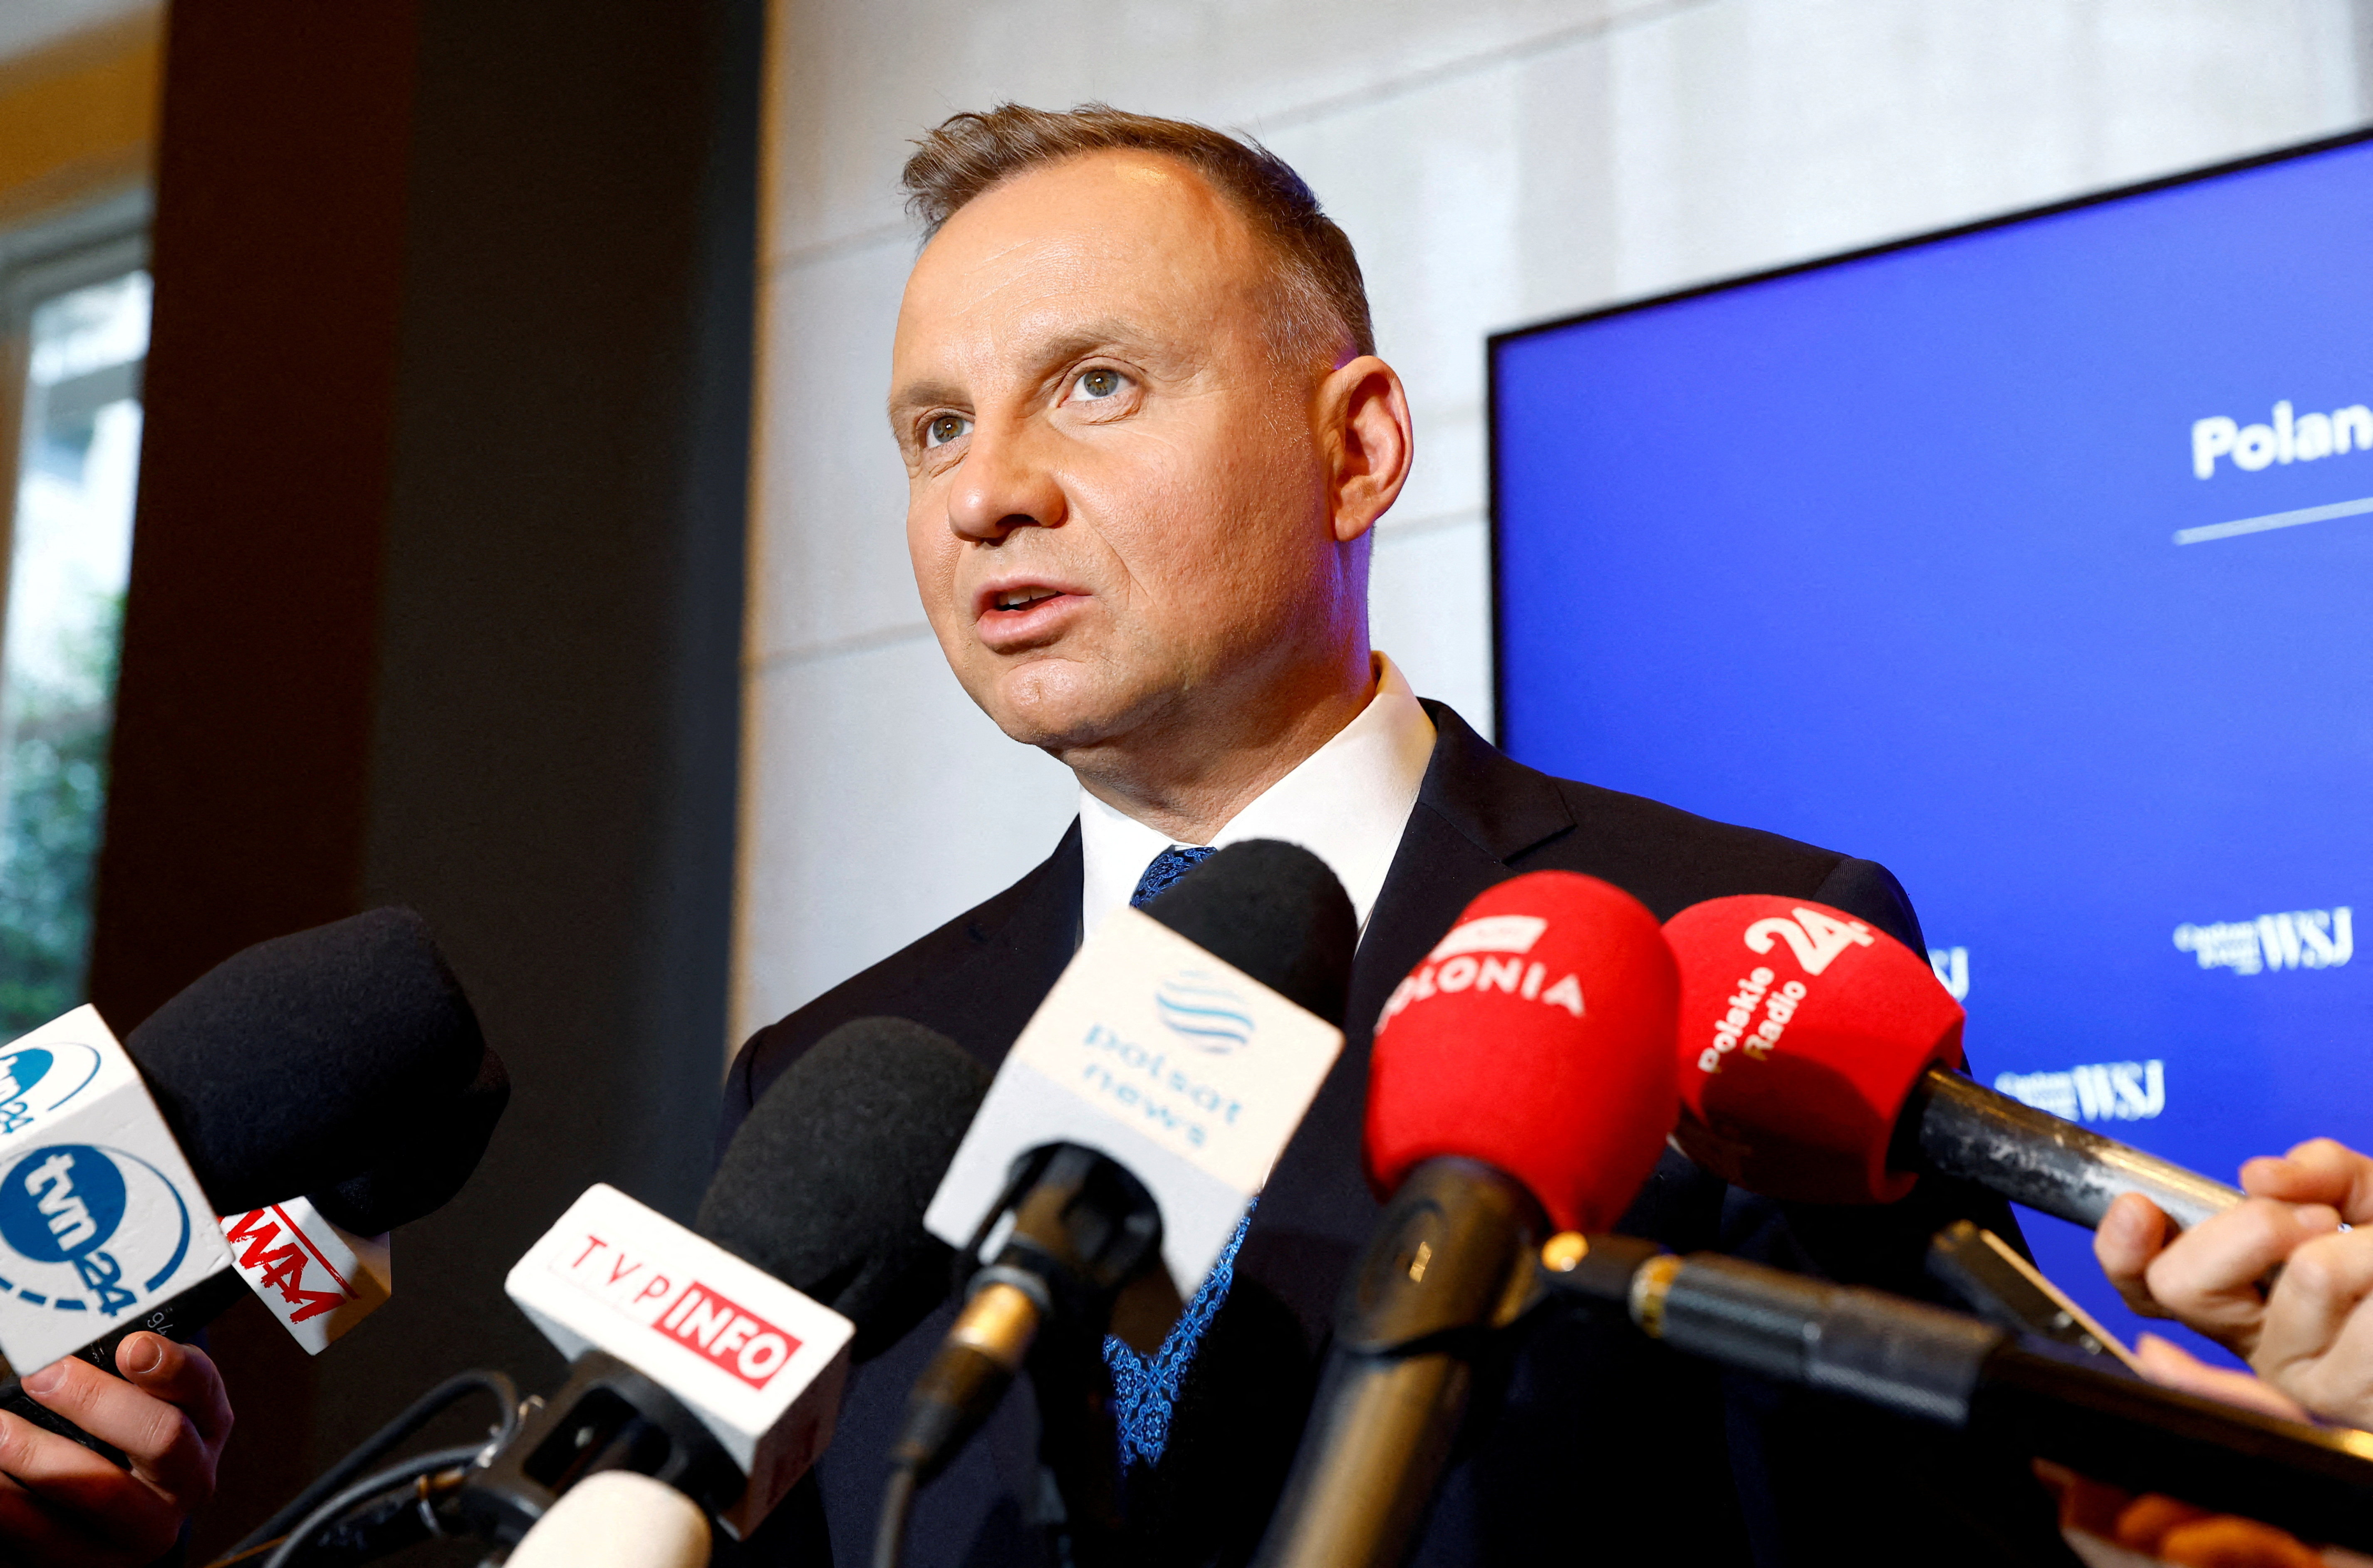 The EU has accused Polish President Andrzej Duda of limiting the independence of Poland's courts. /Peter Cziborra/Reuters